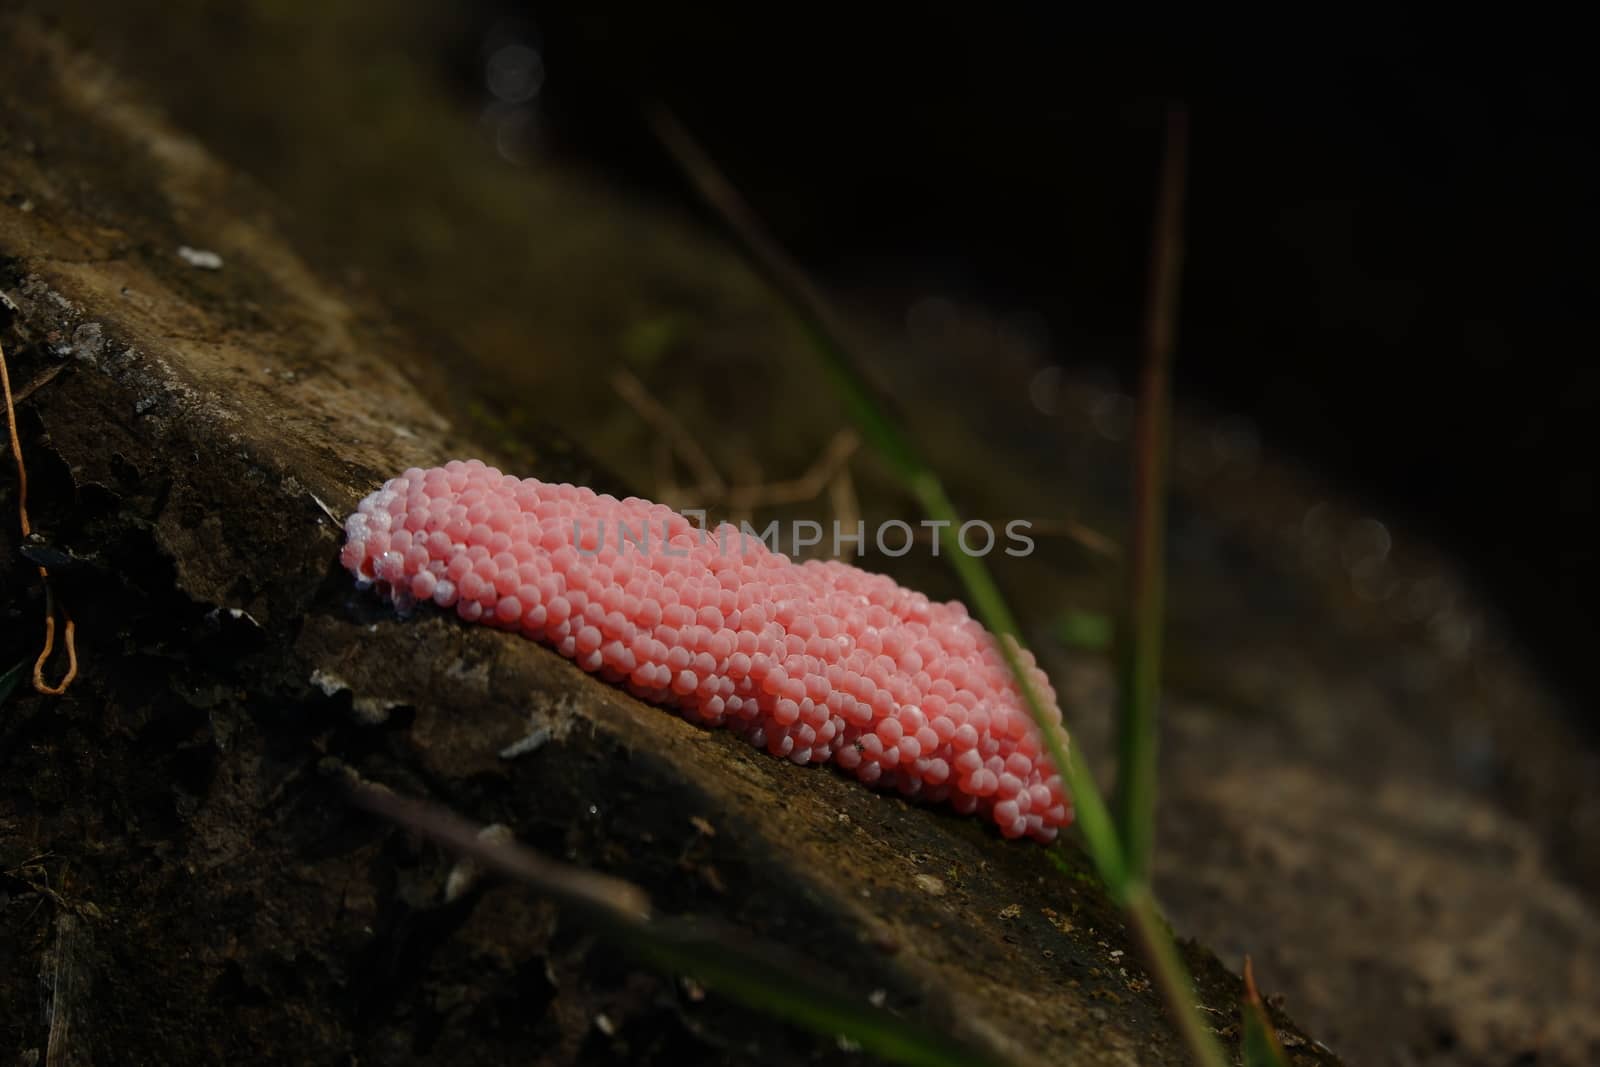 focus image of pink snail eggs attached to the surface of the pool wall